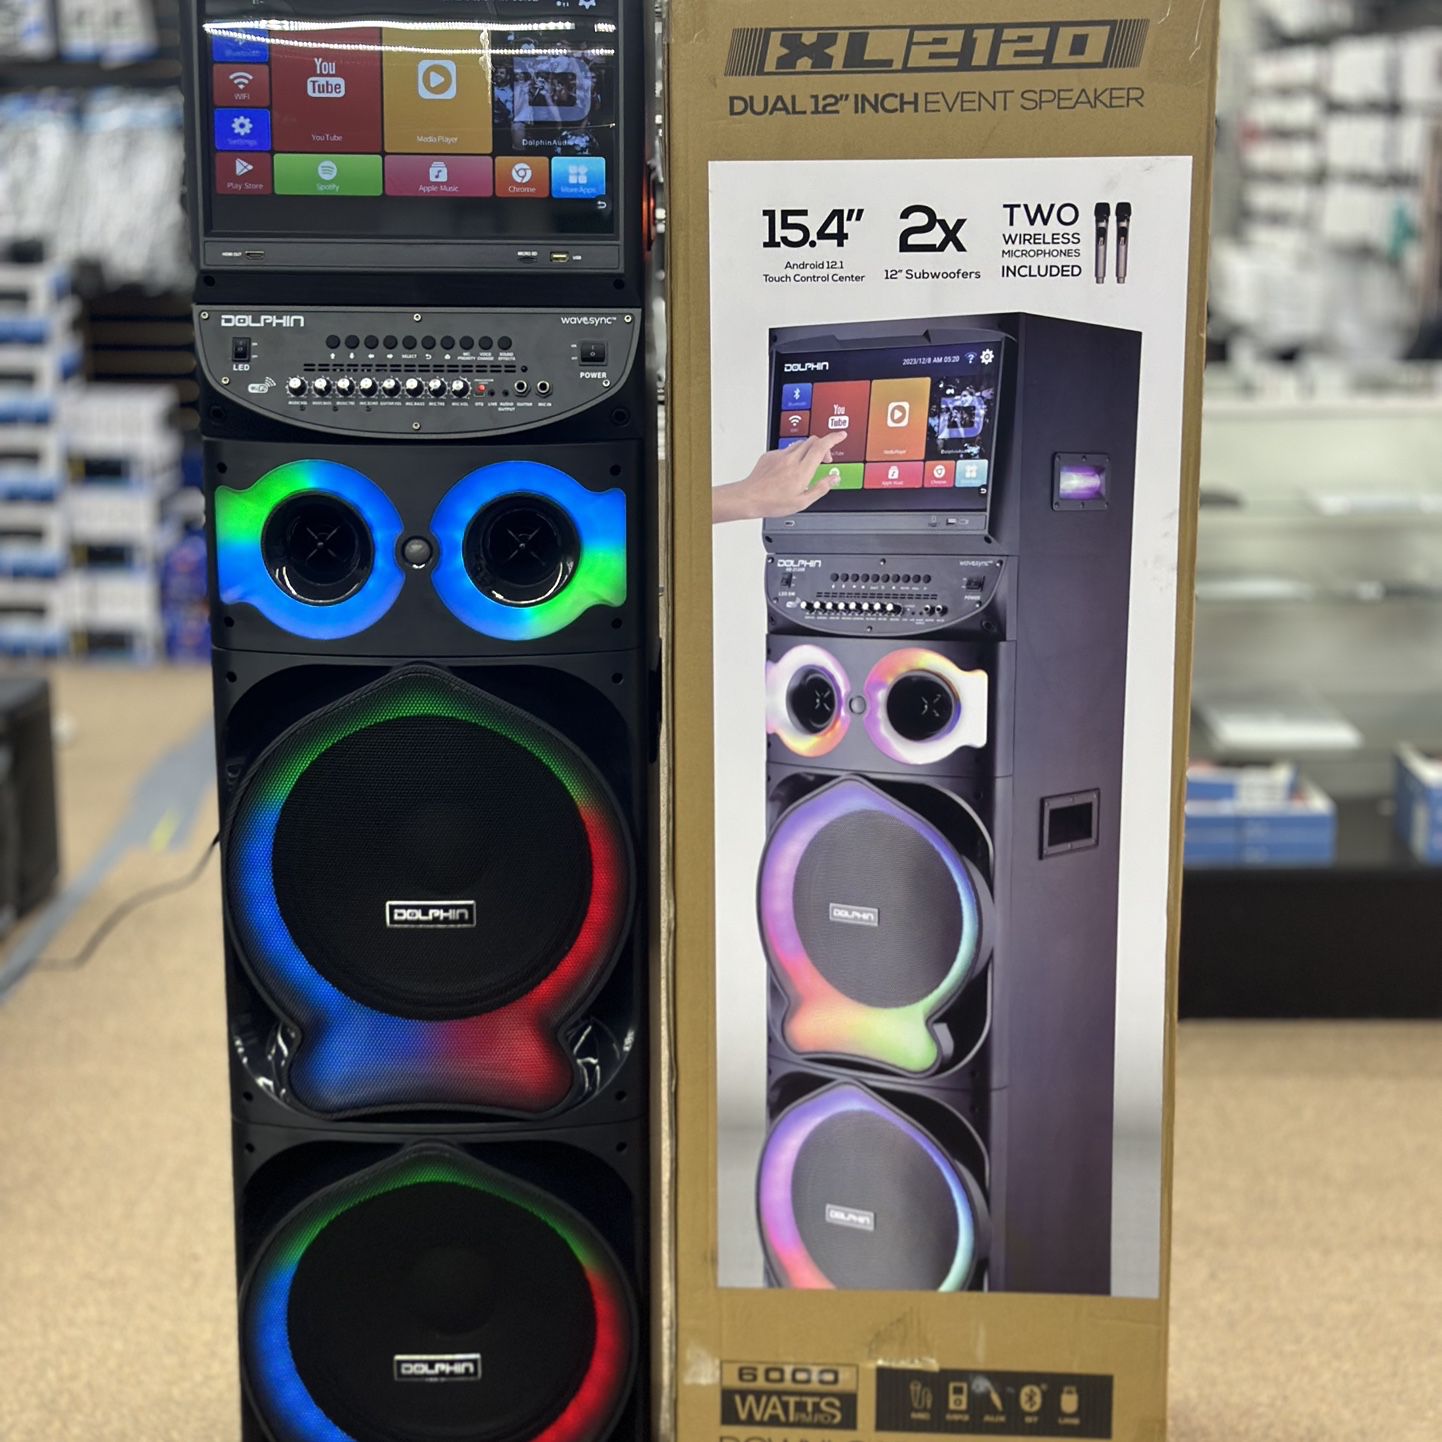 Party Speaker: 15.4" Touch Screen, Dual 12" Subwoofers, and Two Wireless Microphones